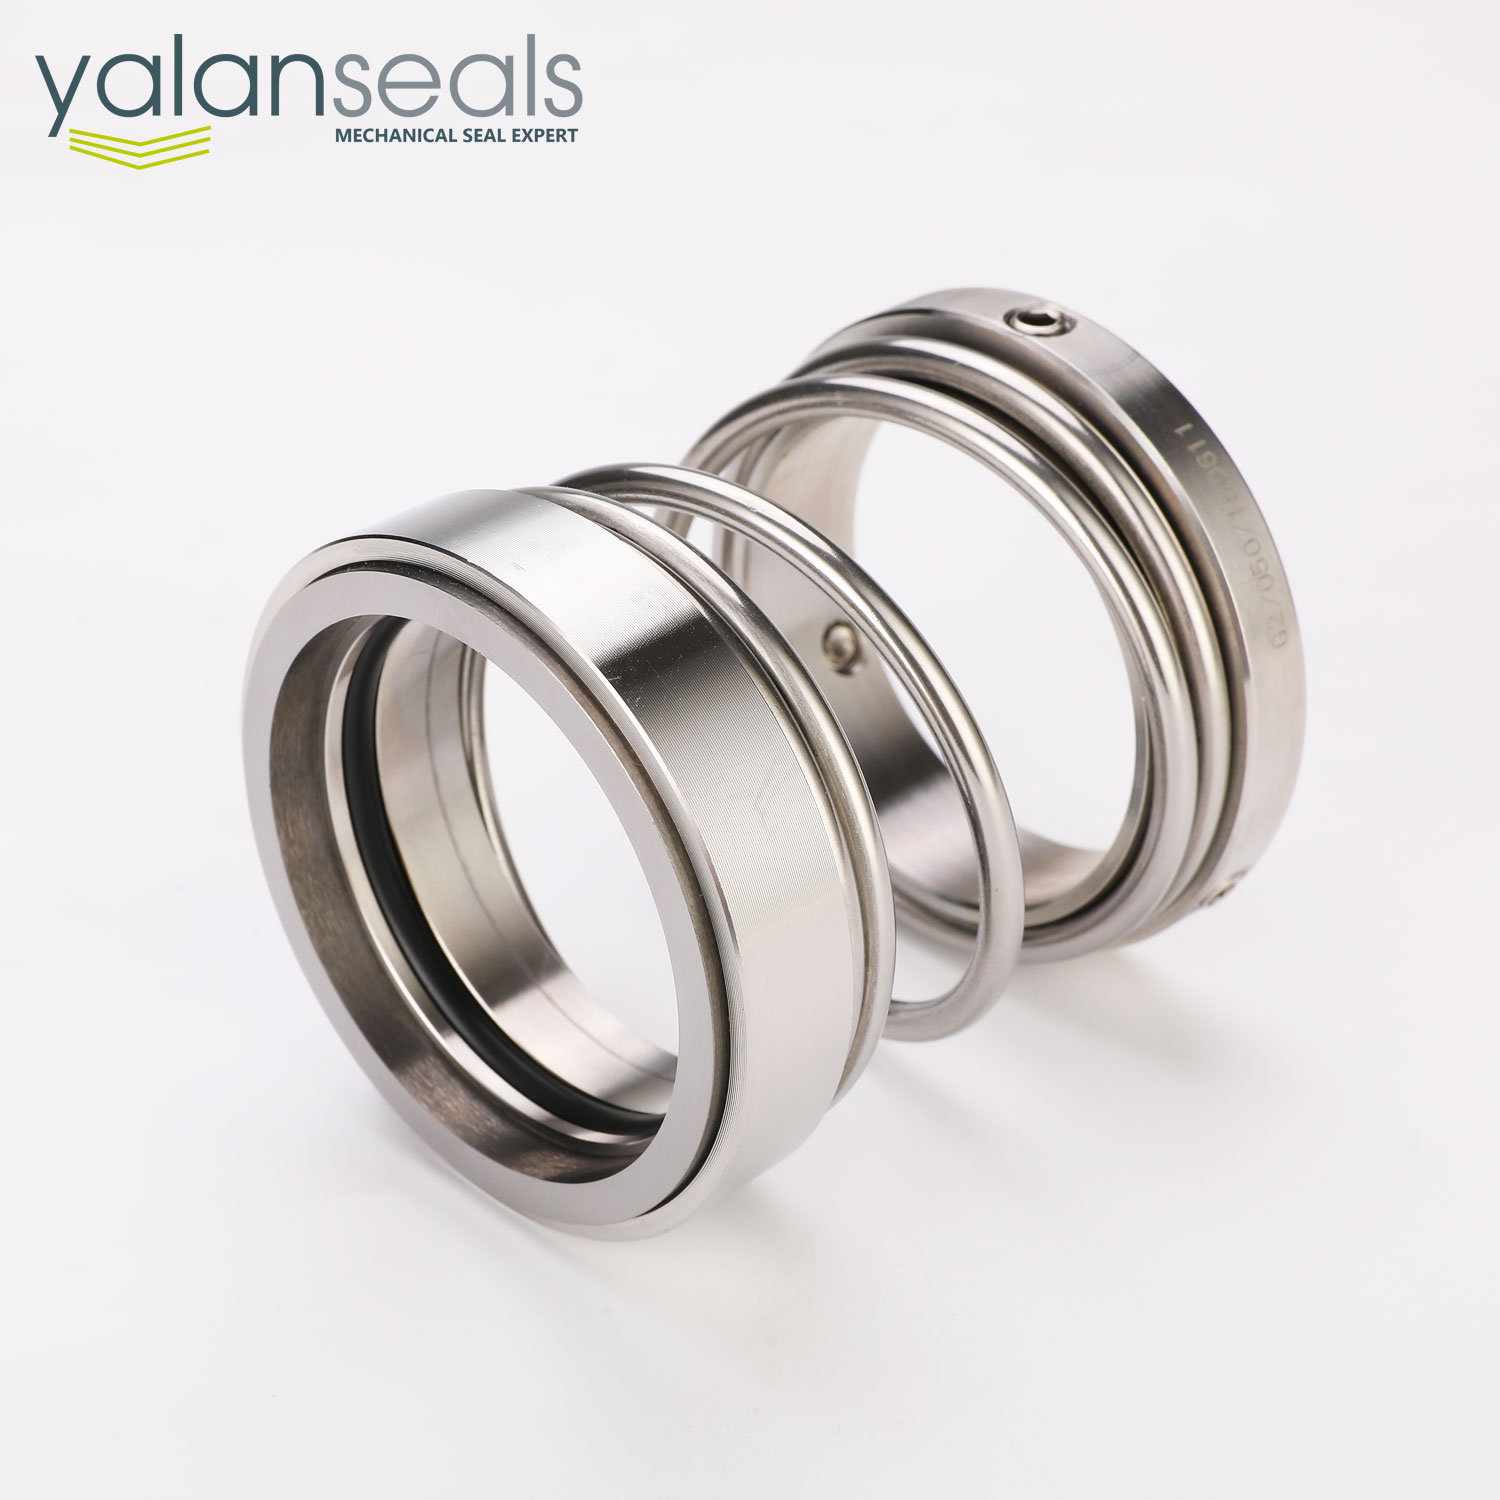 YALAN Type 1527 Mechanical Seals for Industrial Pumps